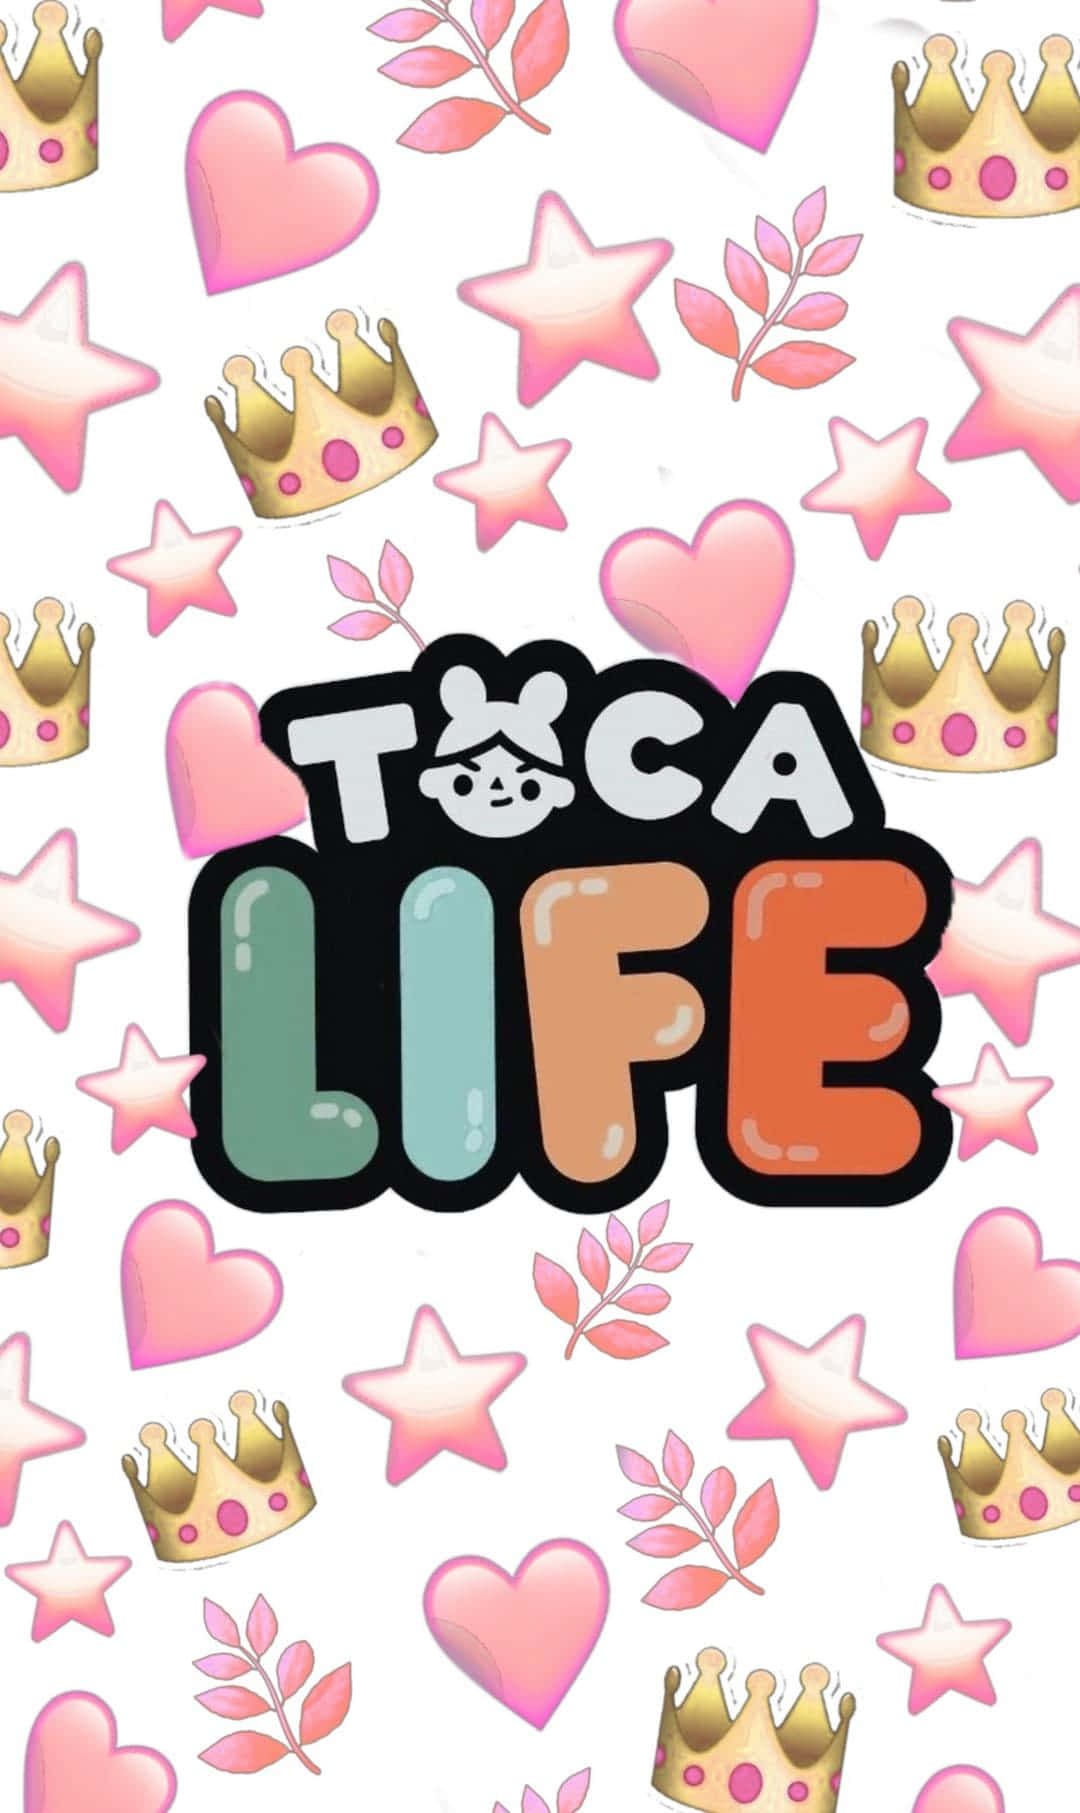 Fun in the park with Toca Boca's Tocies